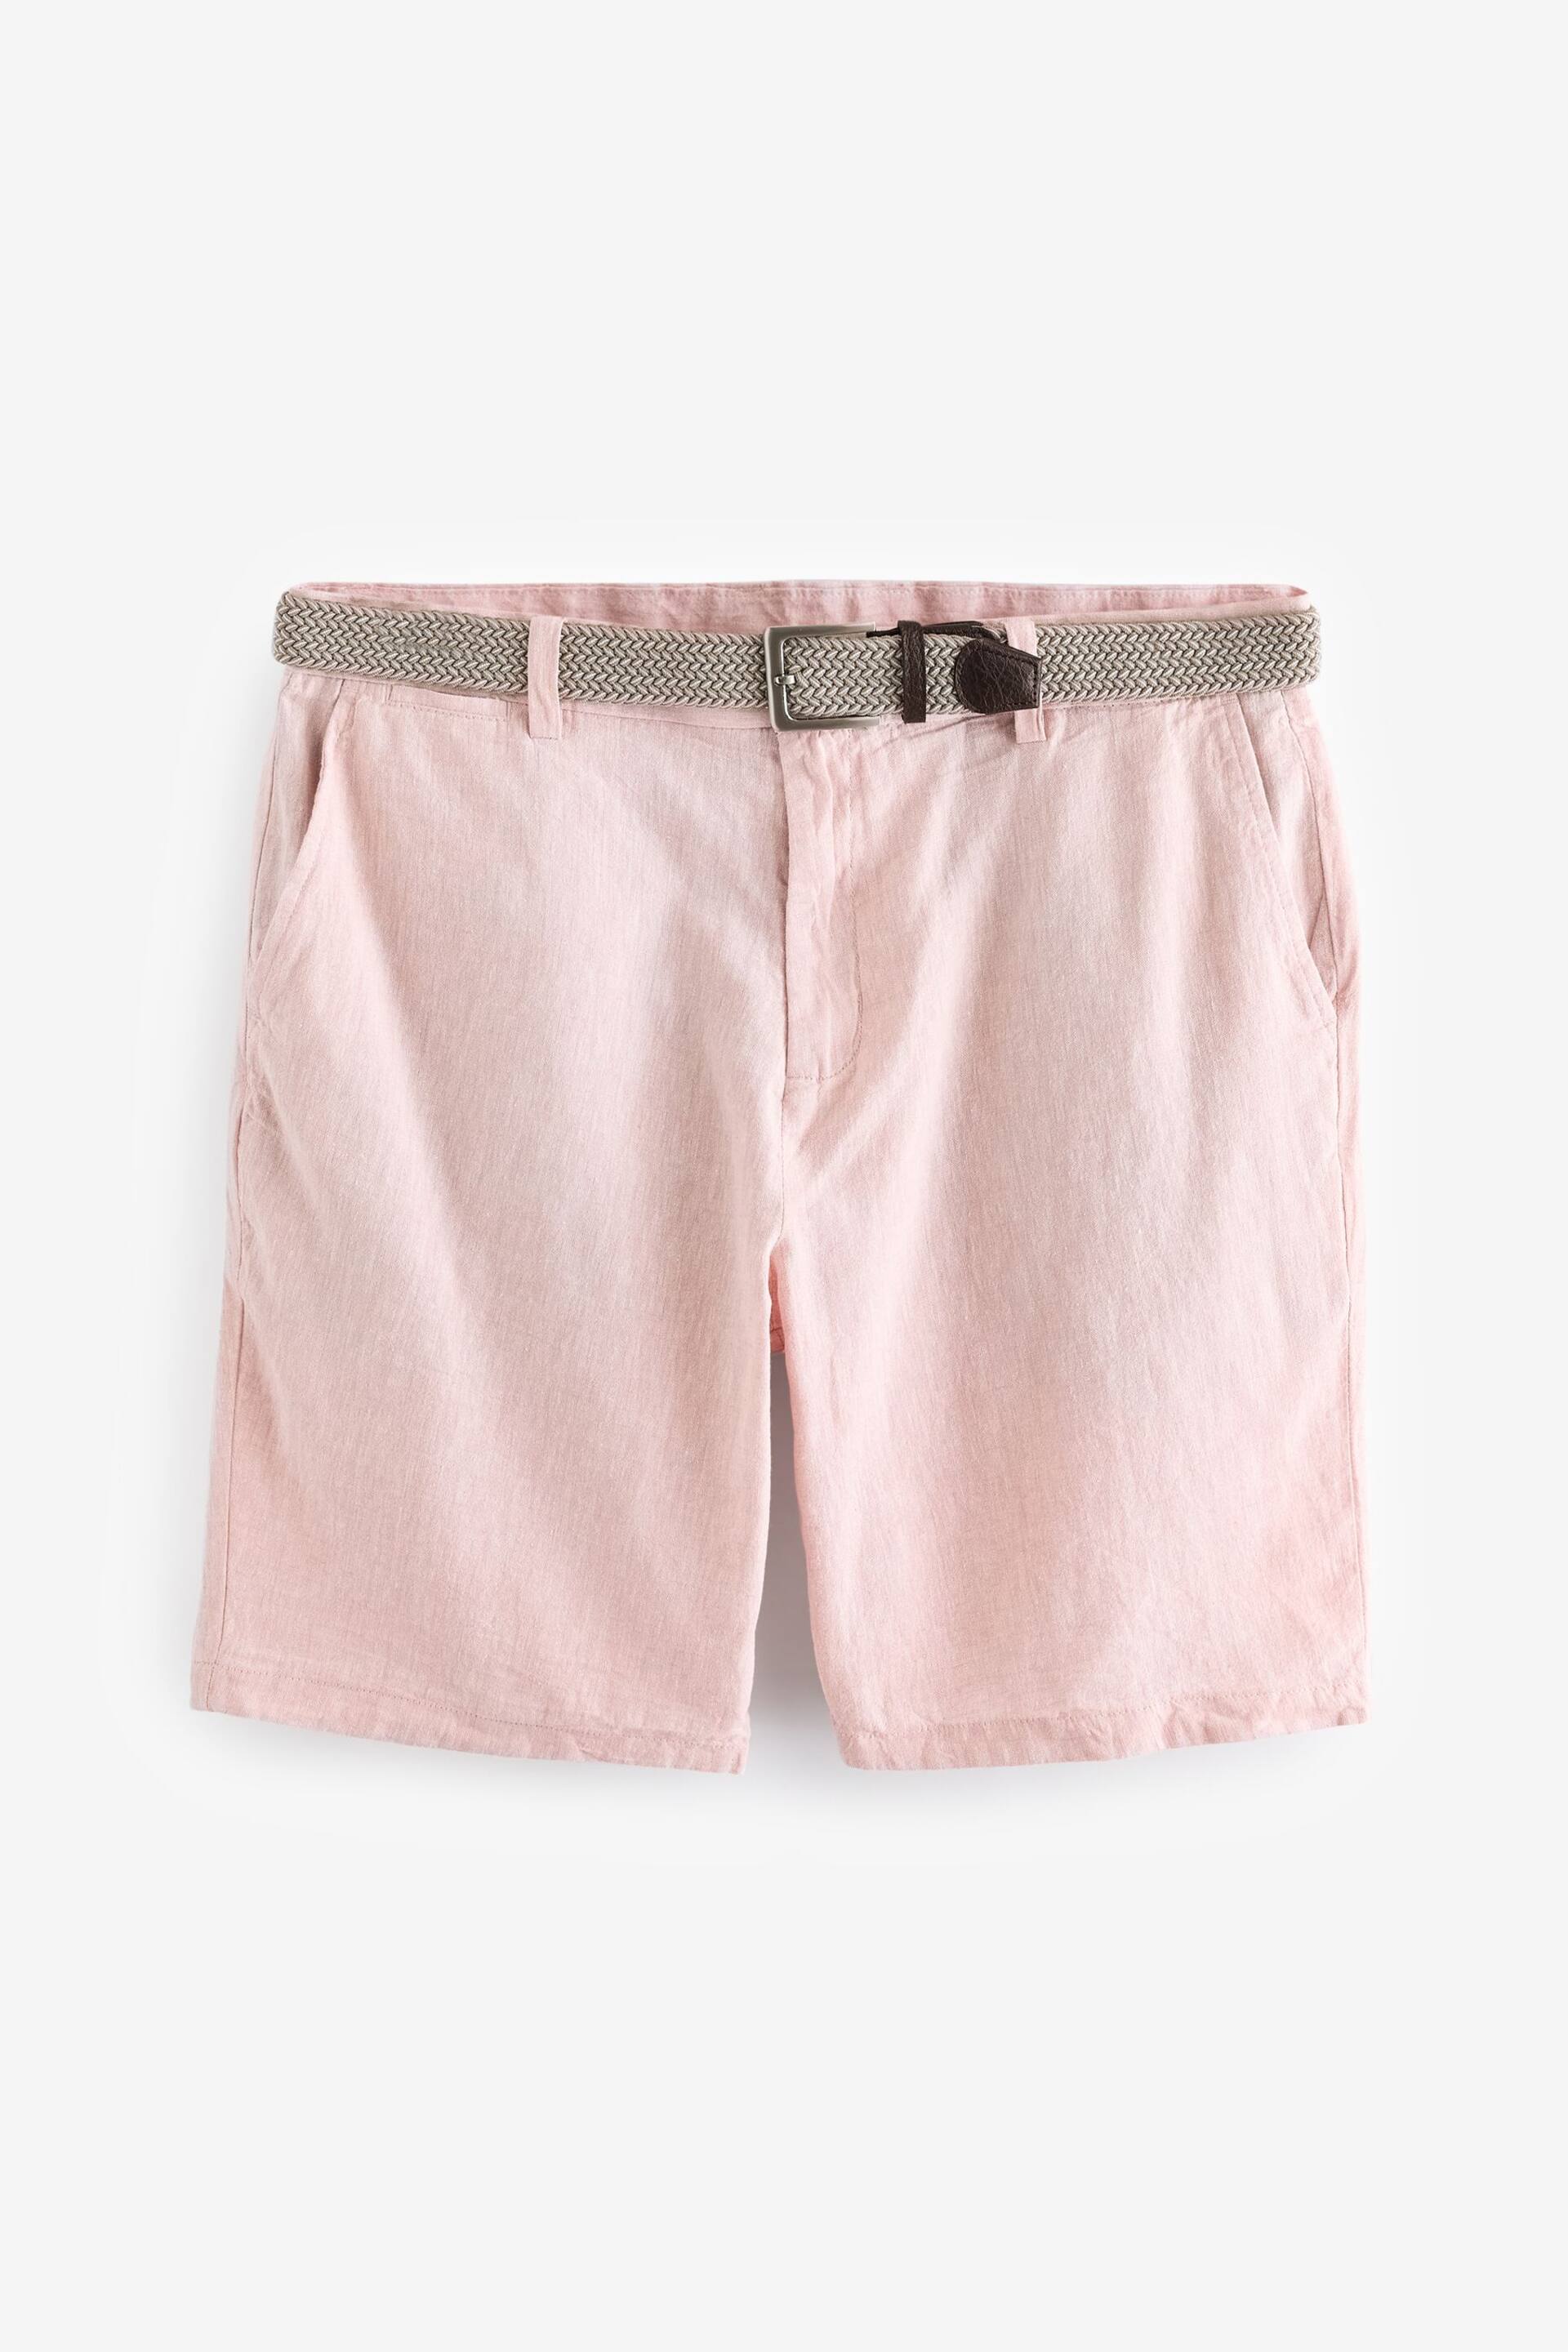 Pink Linen Cotton Chino Shorts with Belt Included - Image 5 of 8